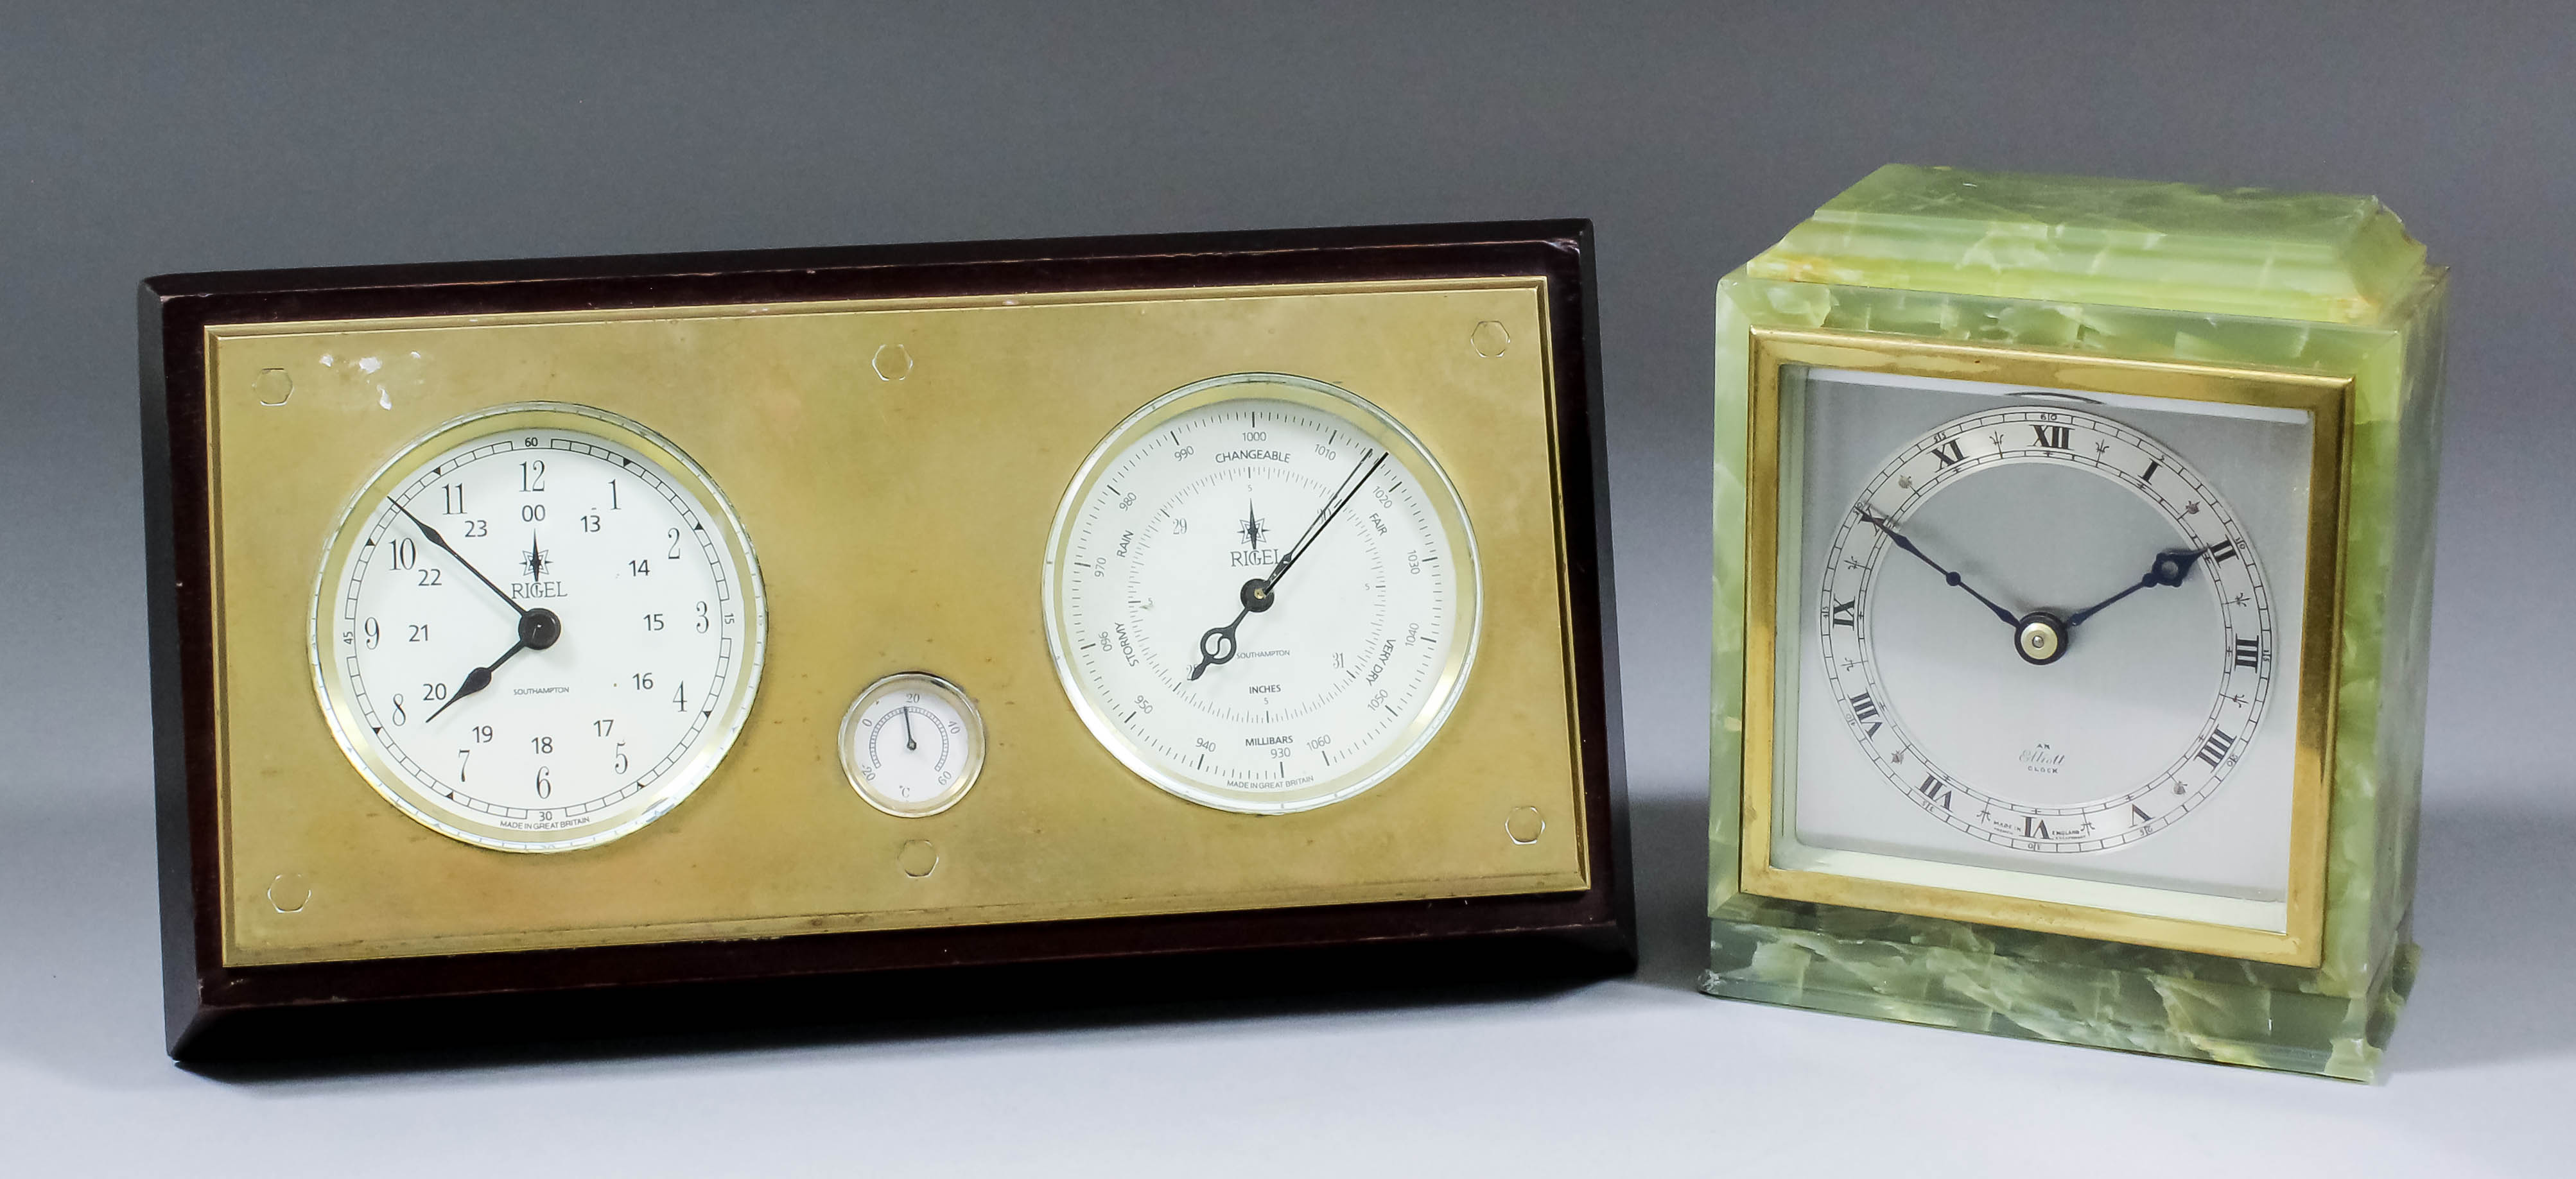 A 20th Century mahogany and brass faced desk timepiece and aneroid barometer by Rigel of